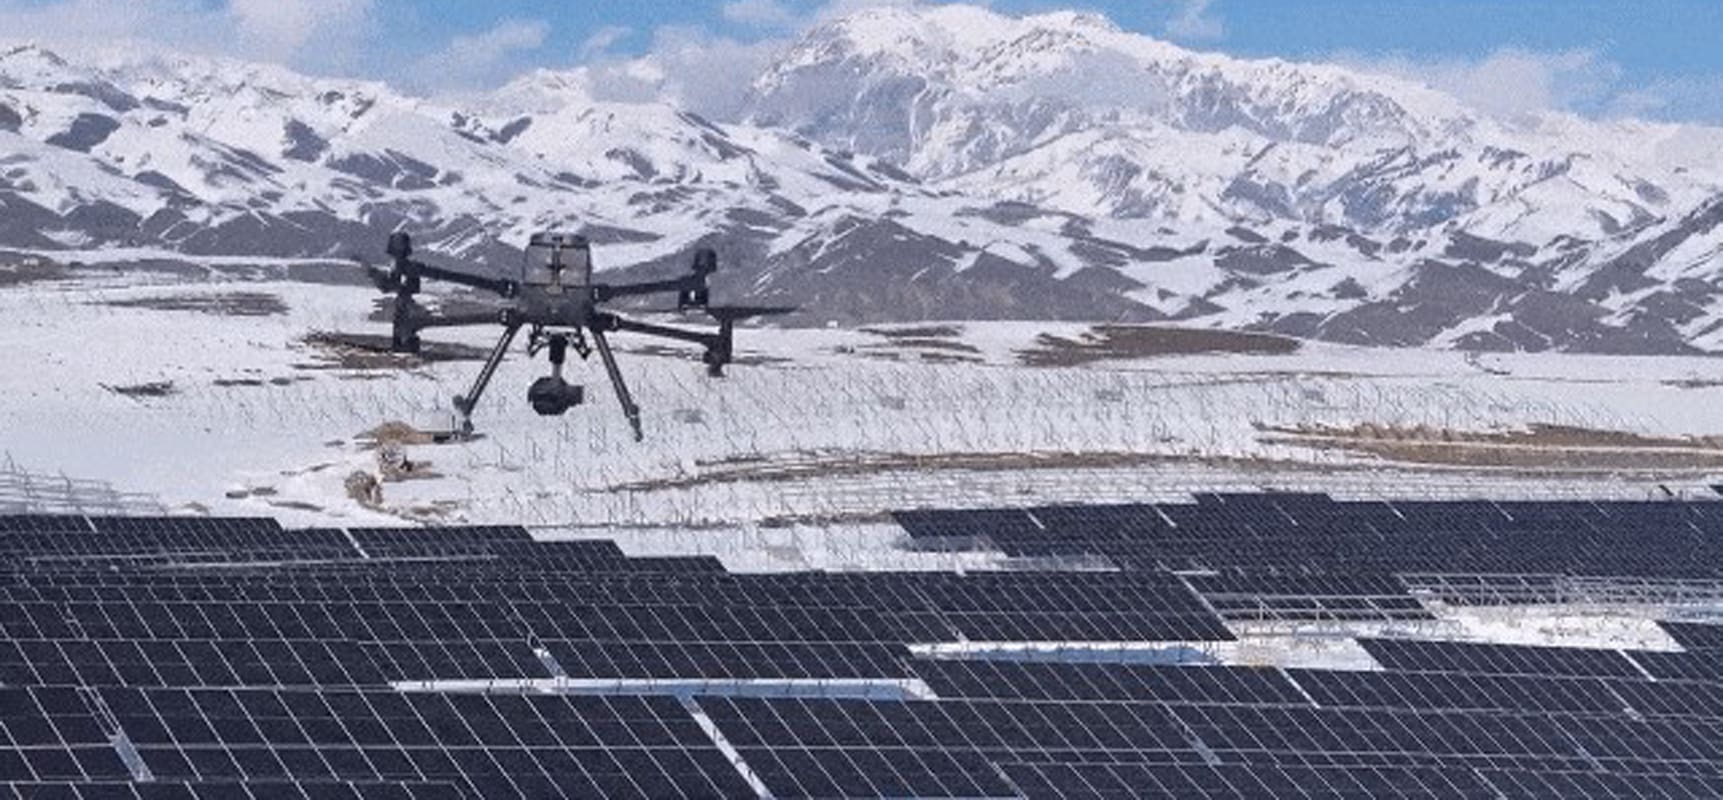 The largest single unit in Asia! The photovoltaic project undertaken by China Construction Second Engineering Bureau was successfully connected to the grid